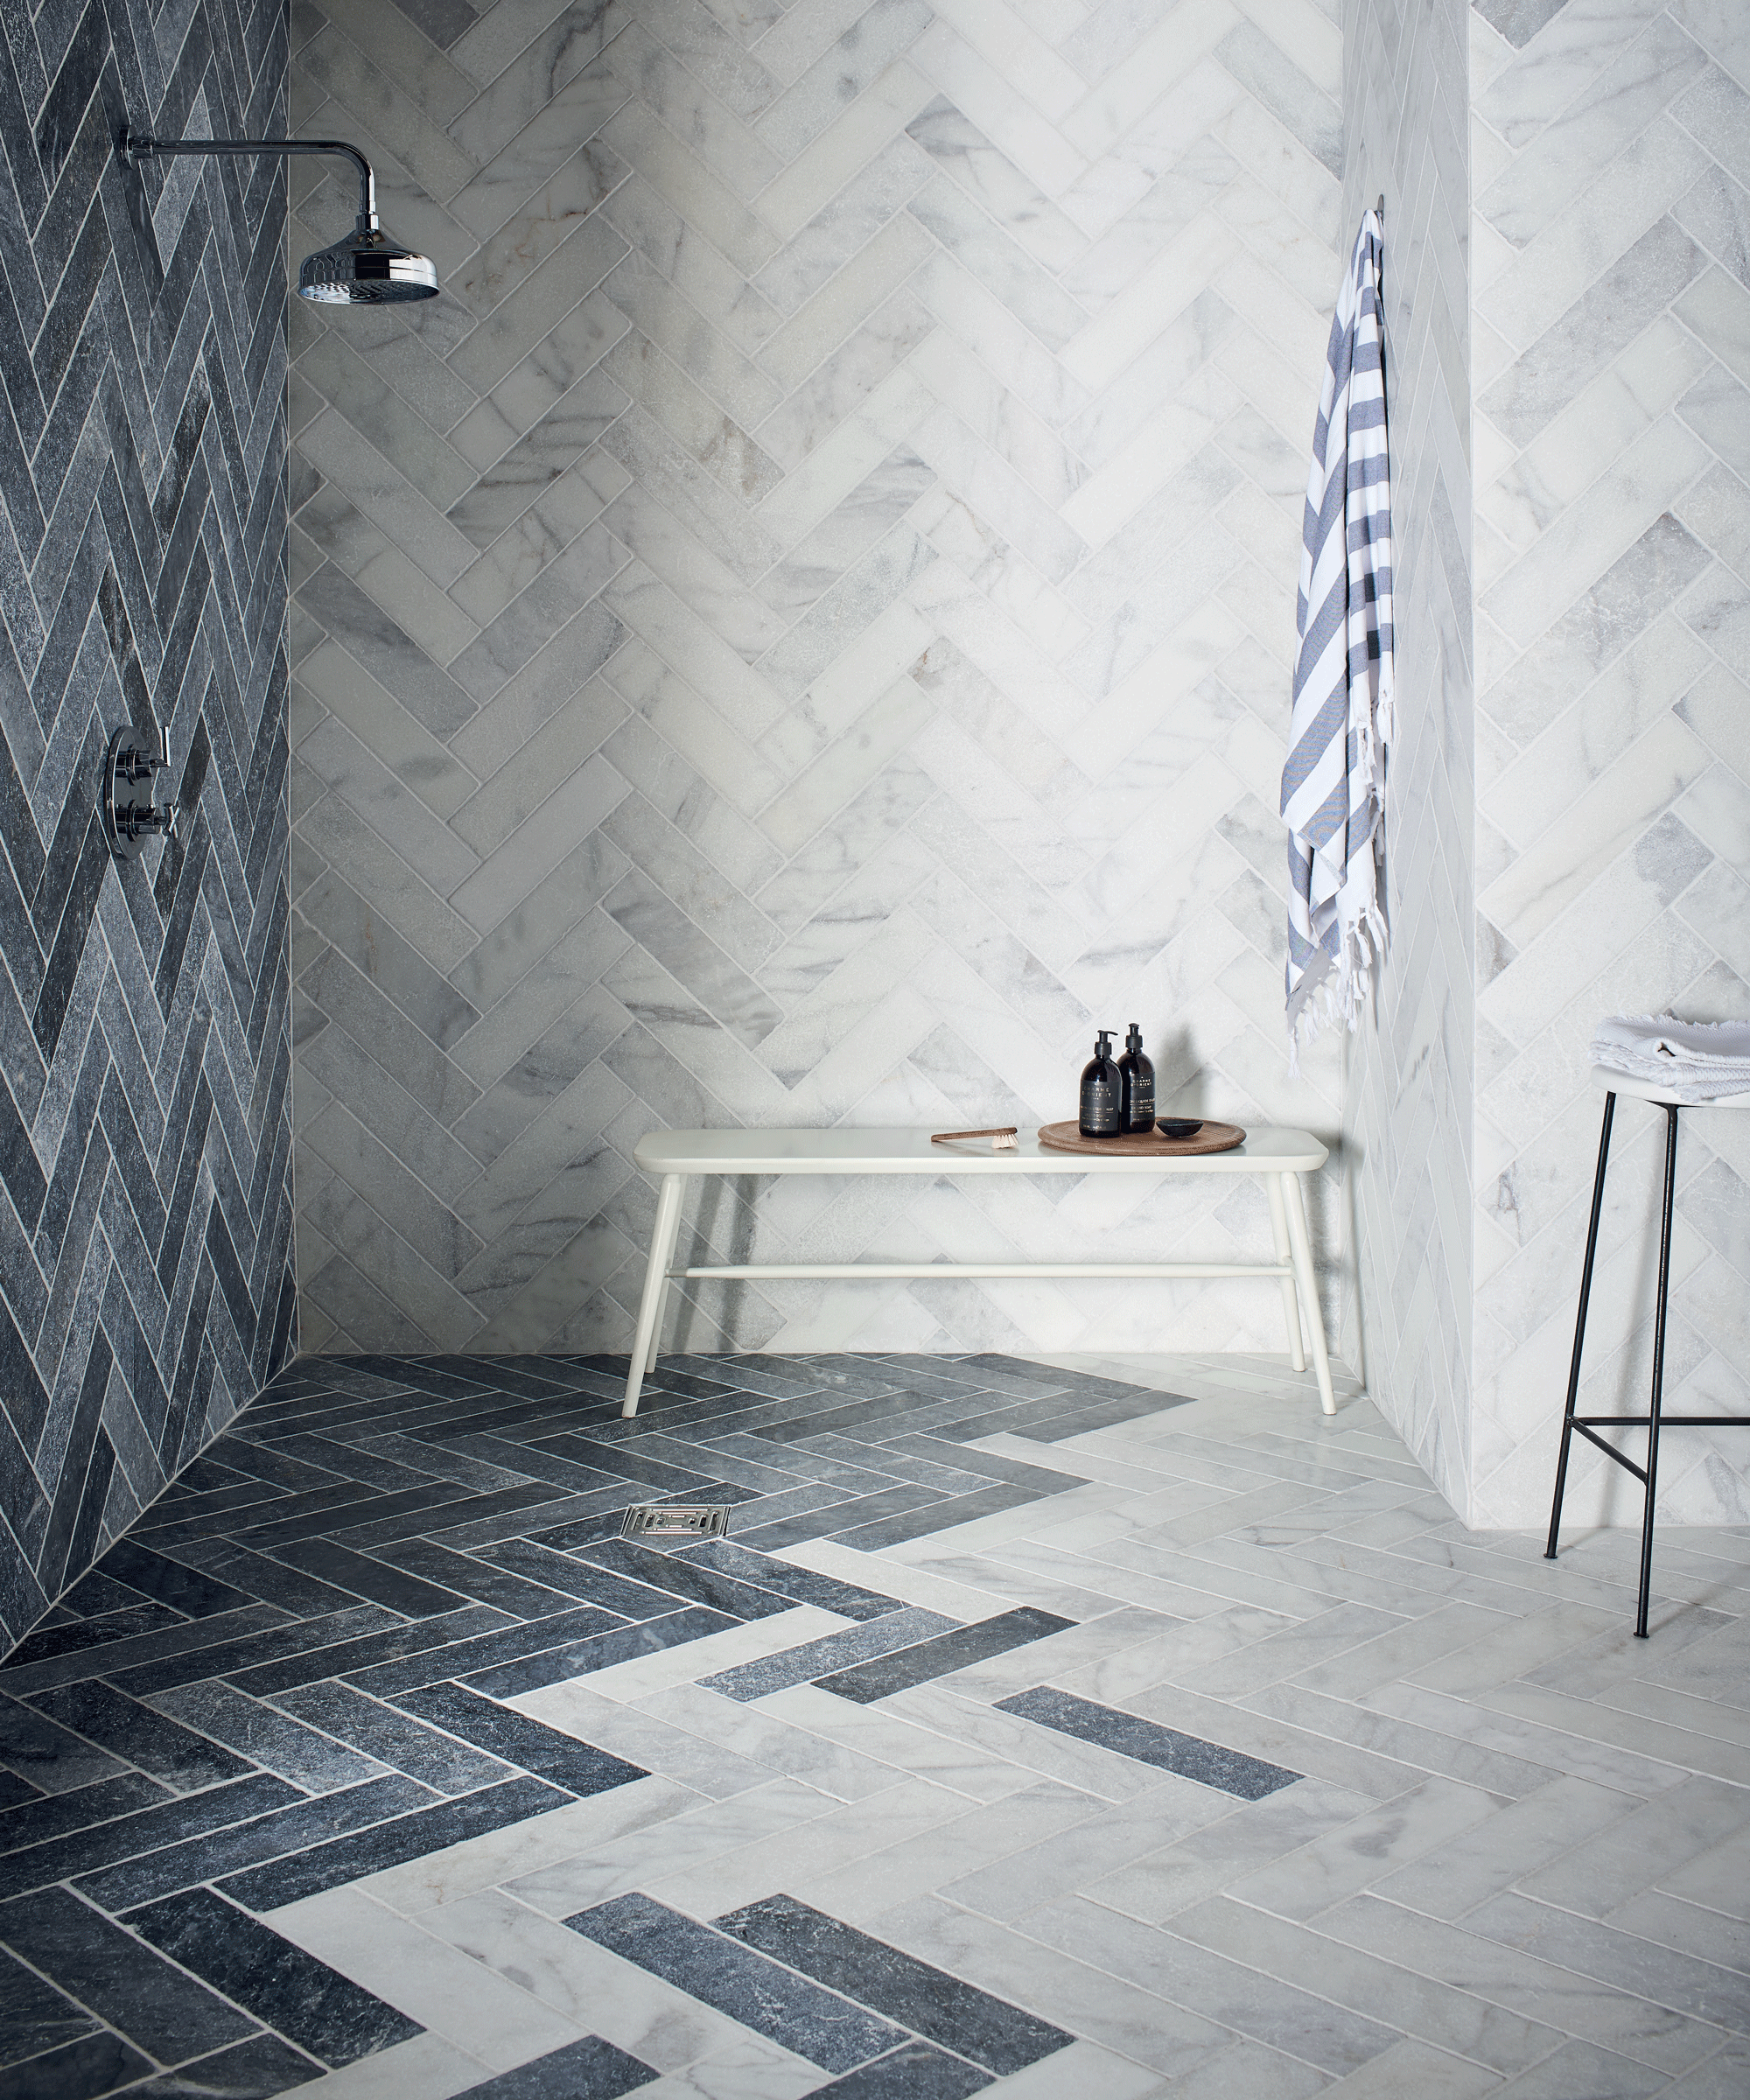 Shower with marble tiles laid in herringbone pattern